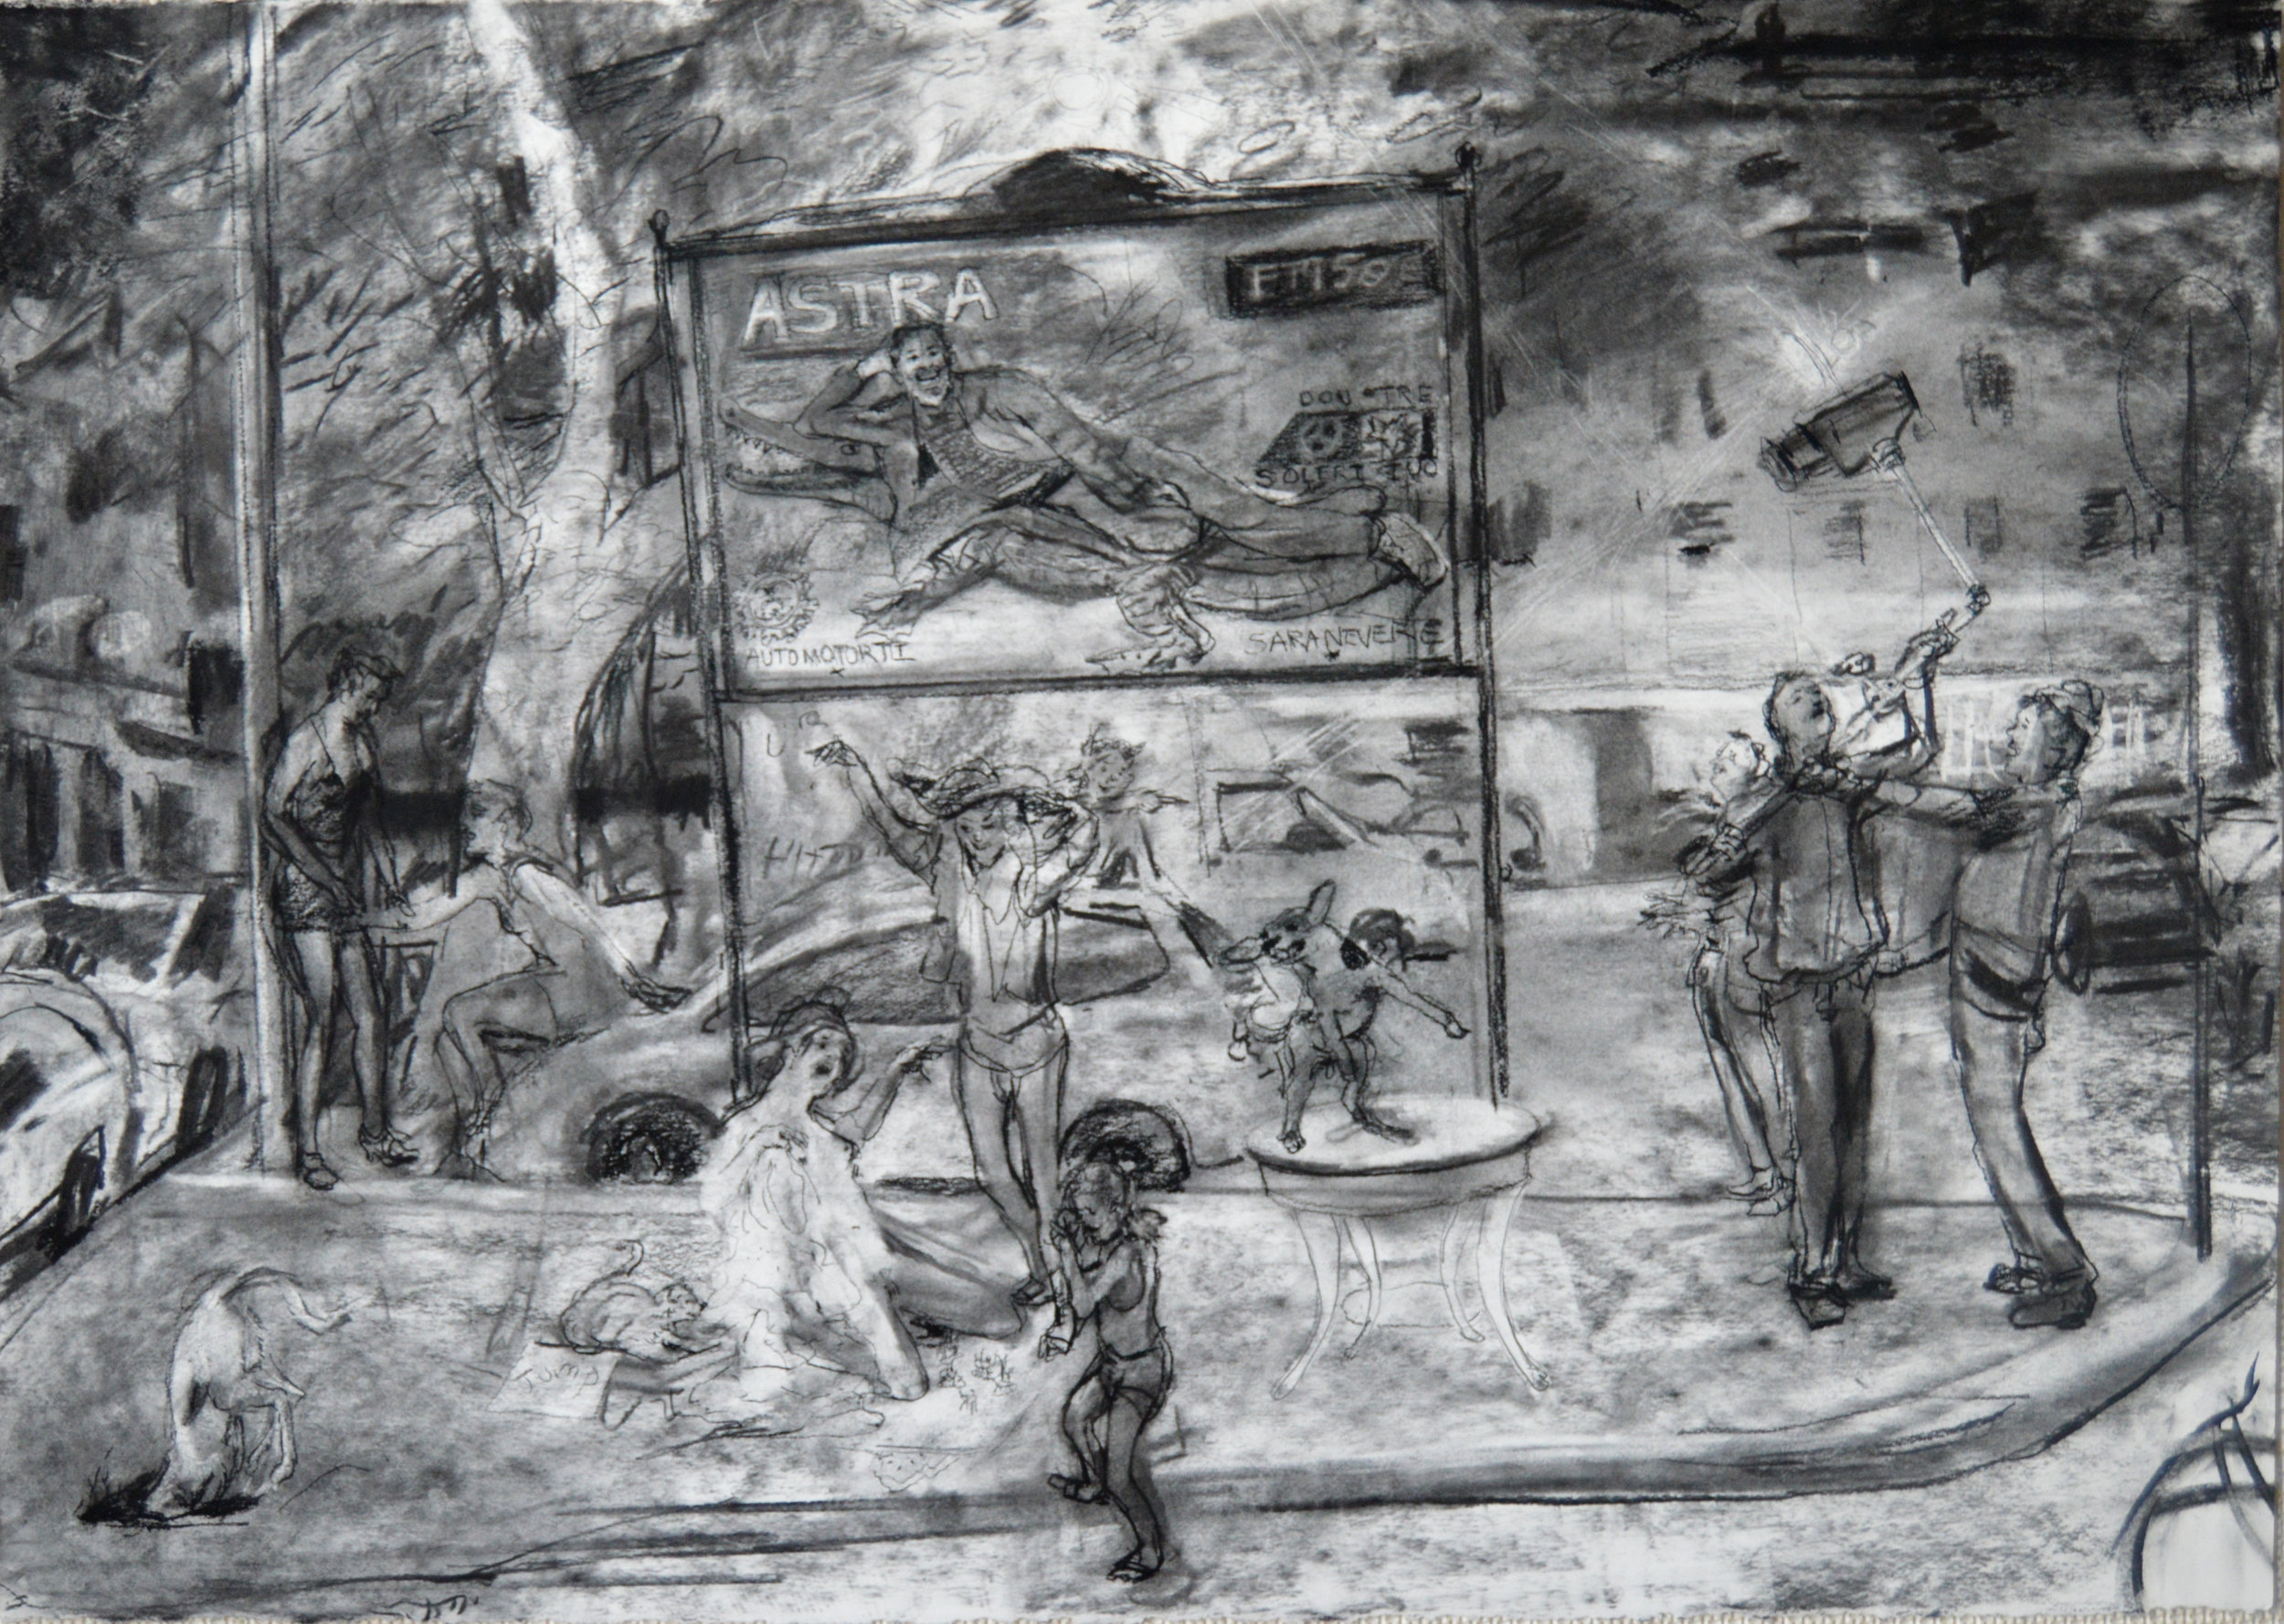 Astra ROma charcoal 28 by 40 inches 2015.jpg